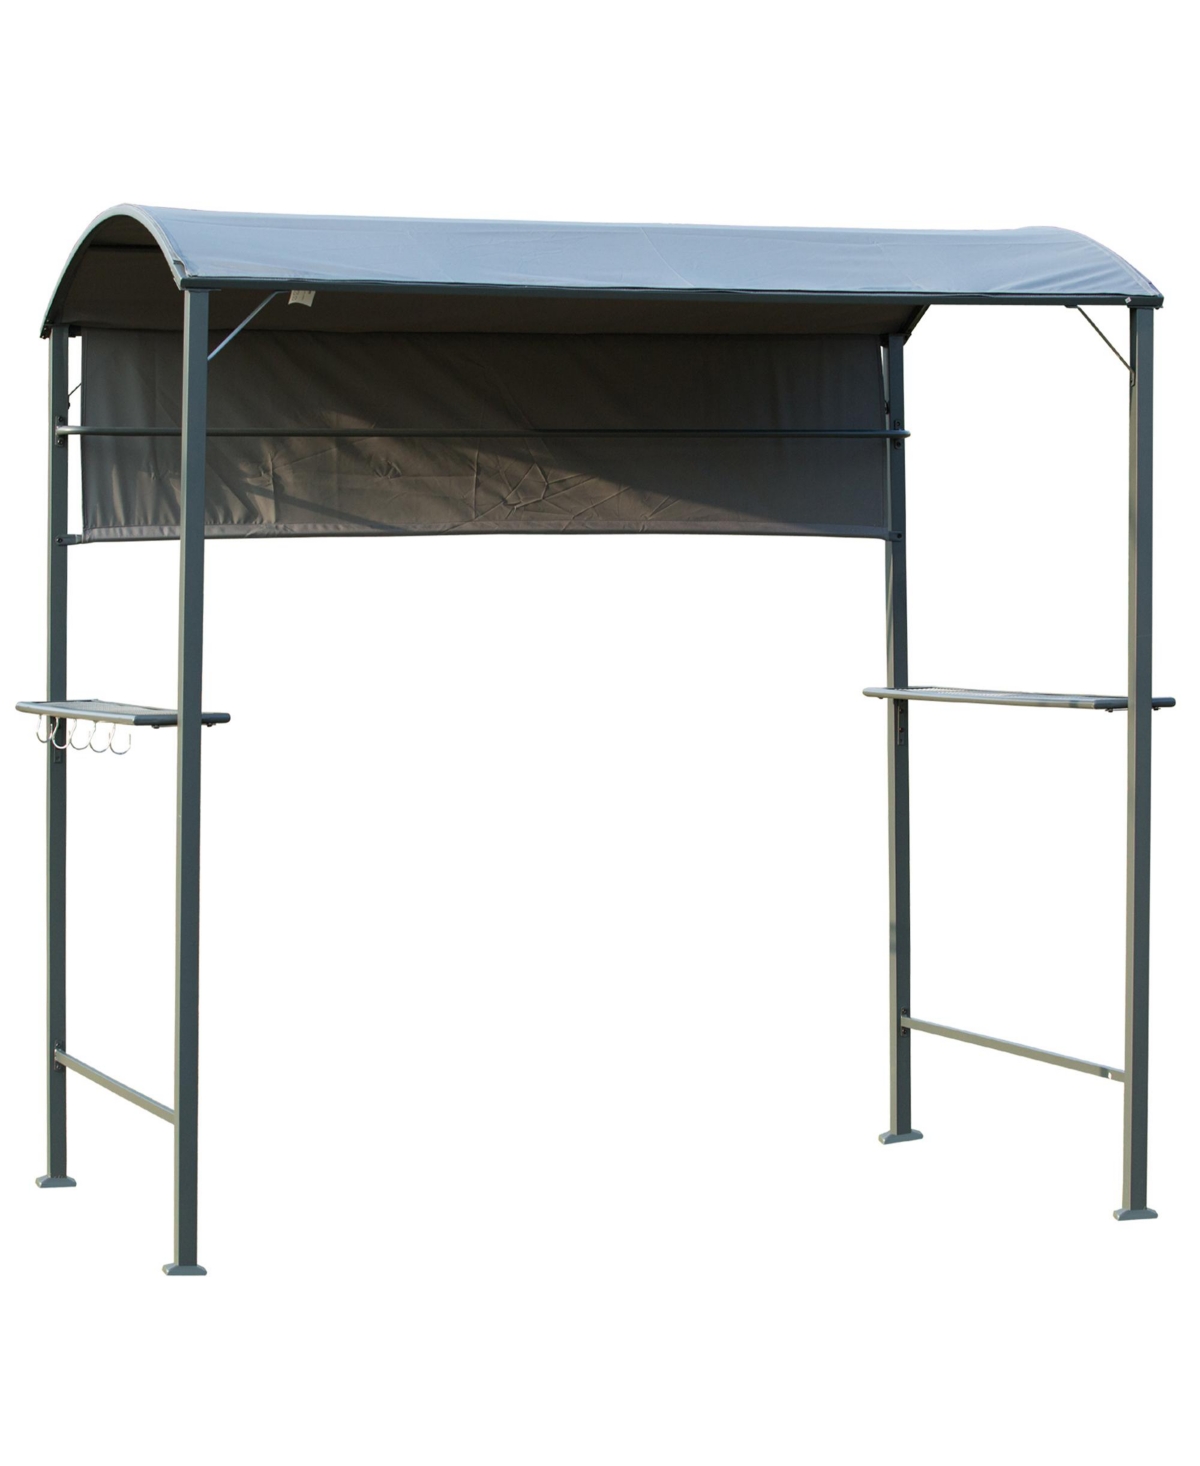 7FT Grill Gazebo Bbq Canopy with Sun Shade Panel Side Awning, 2 Exterior Serving Shelves, 5 Hooks for Patio Lawn Backyard - Black